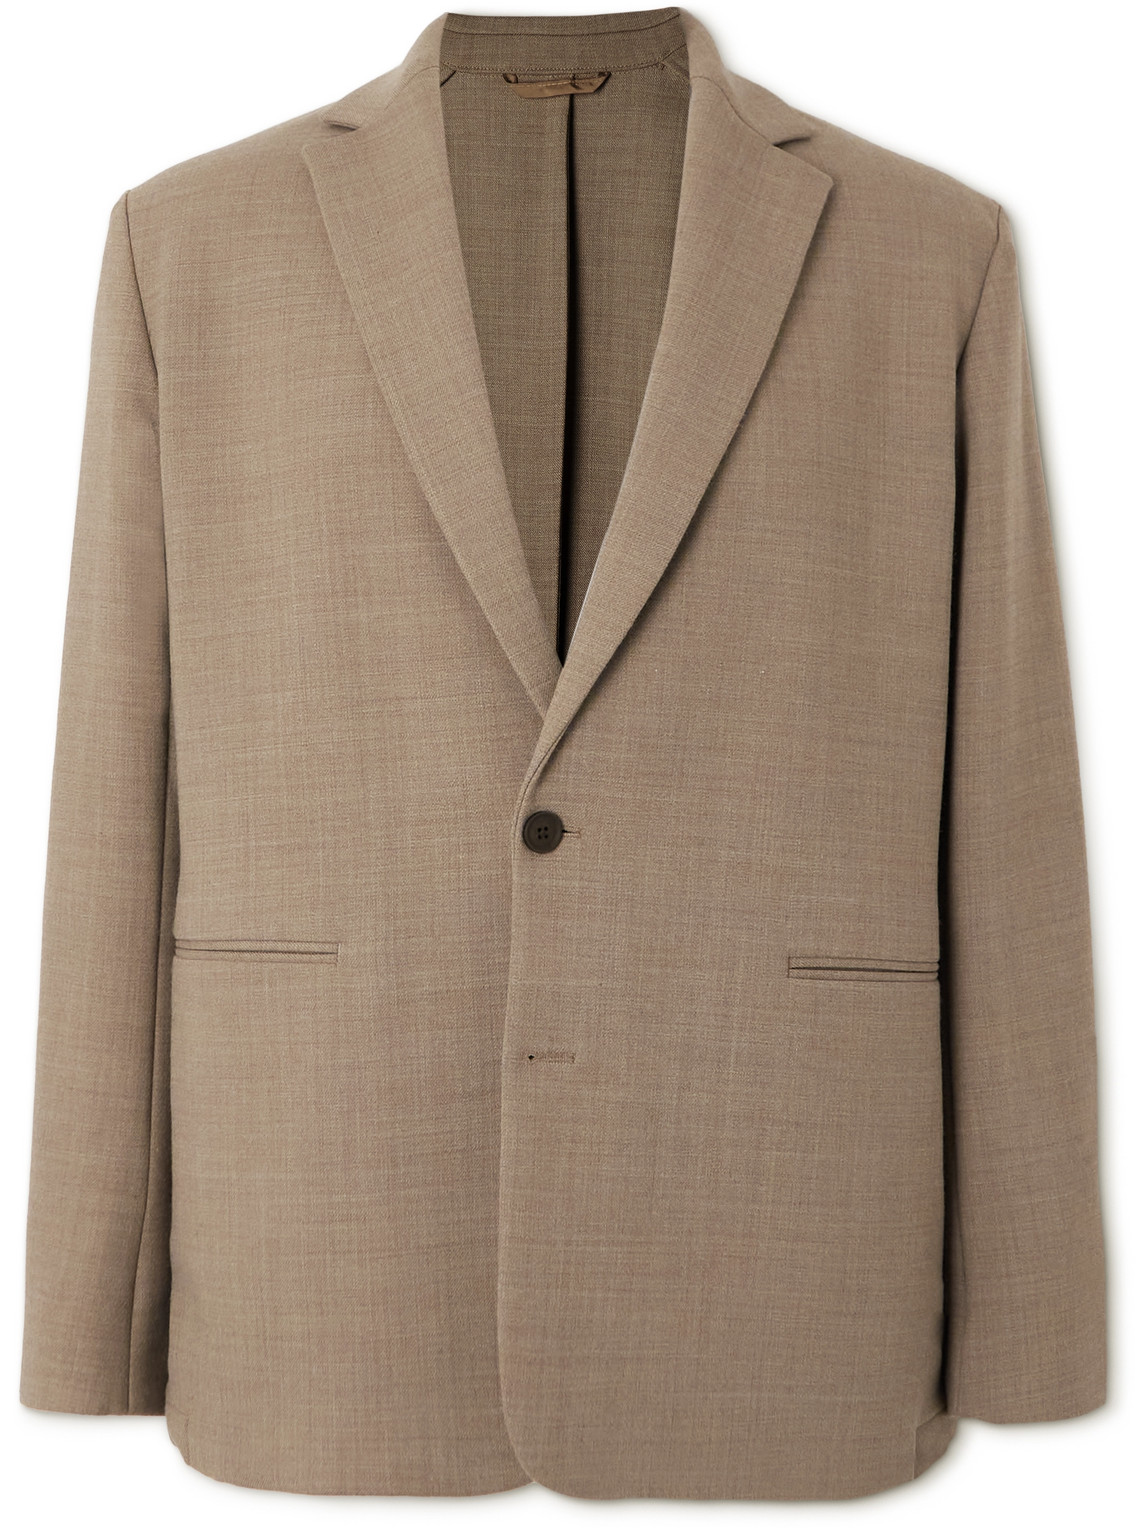 Nn07 Timo 1684 Unstructured Twill Suit Jacket In Gray